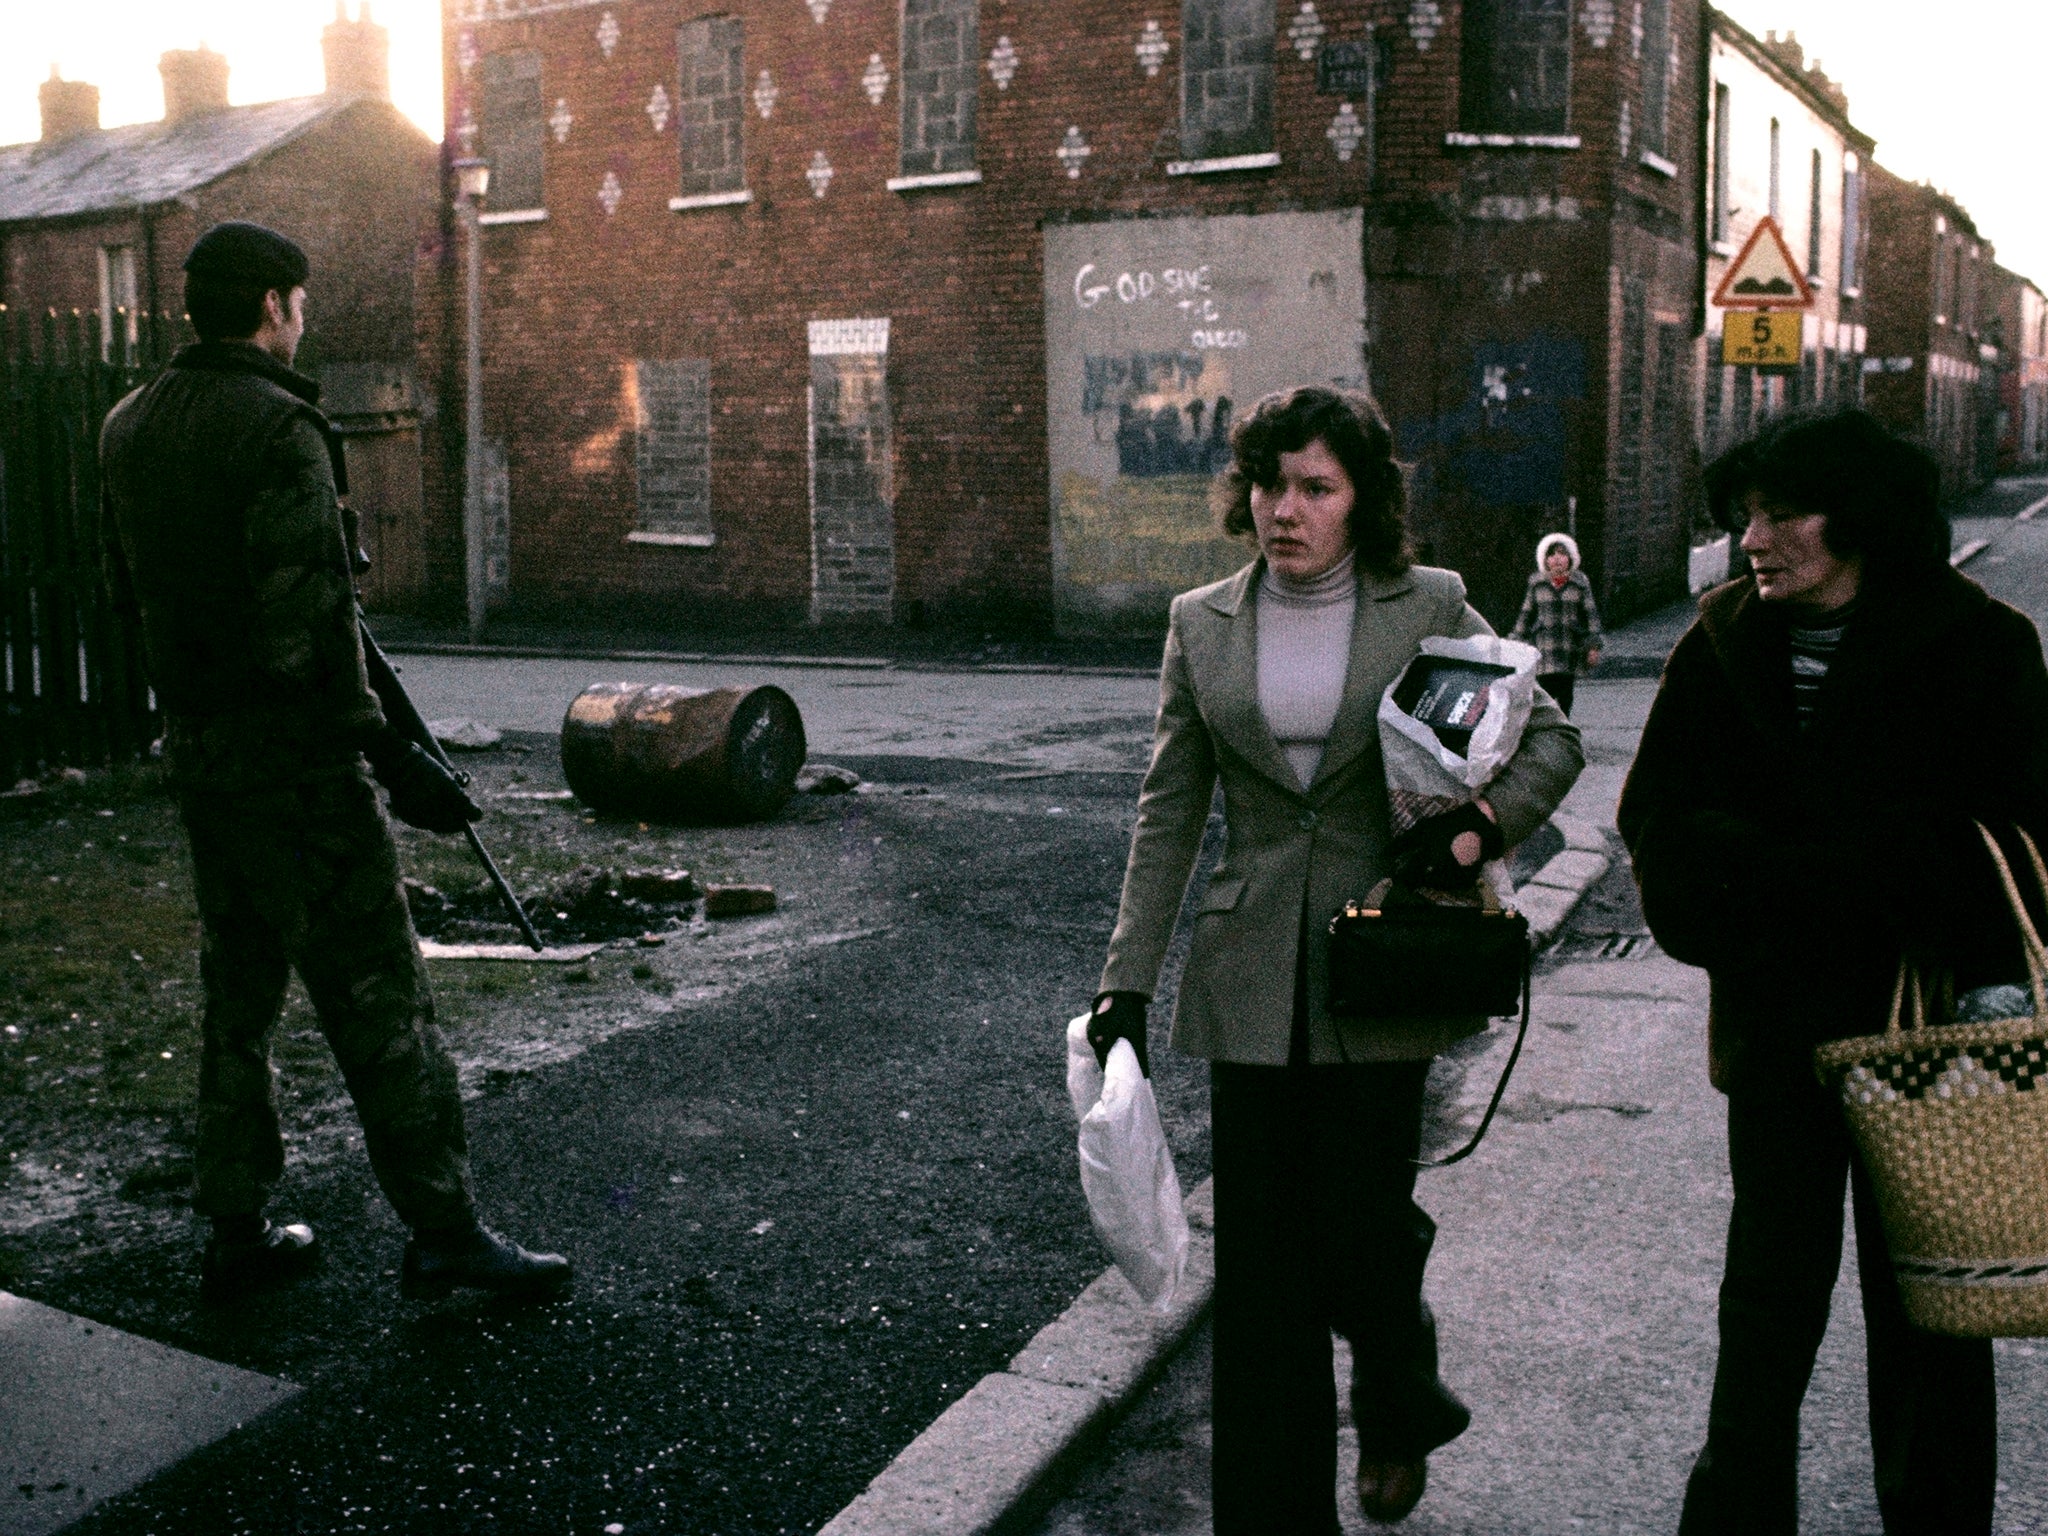 Those in Belfast in the 1970s adjusted to the reality around them